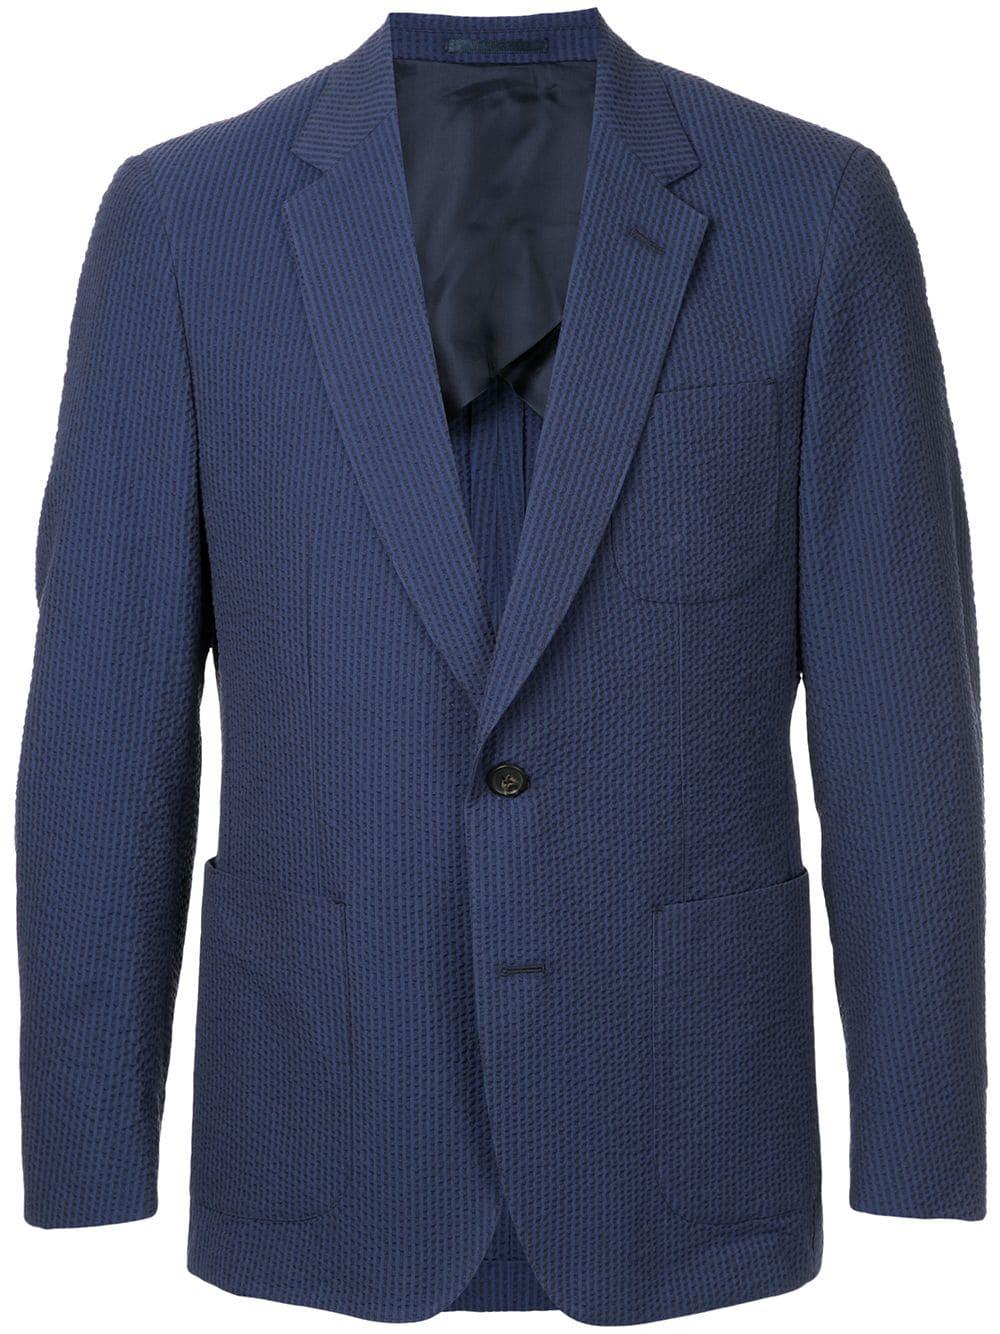 Gieves & Hawkes Cotton Formal Fitted Blazer in Blue for Men - Lyst